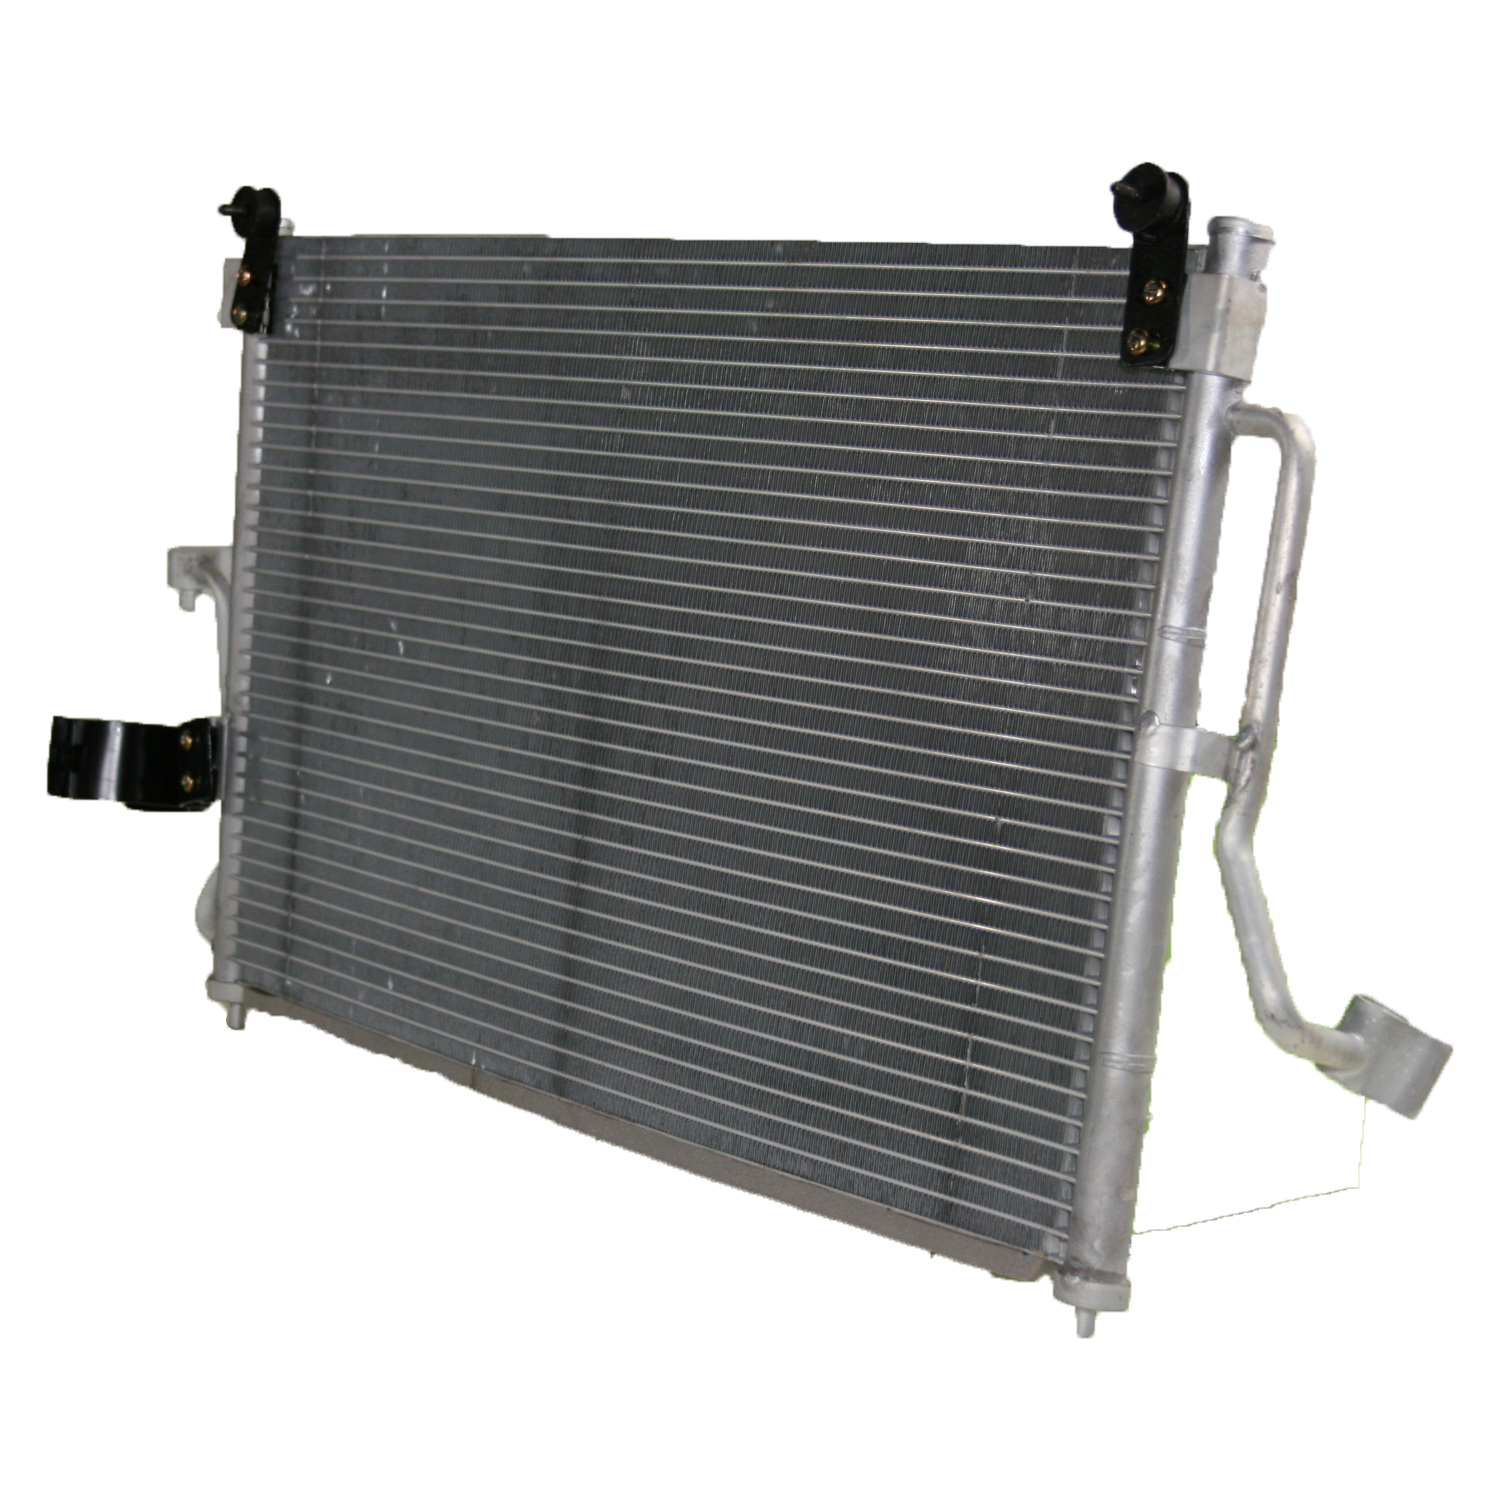 TCW Condenser 44-3032 New Product Image field_60b6a13a6e67c